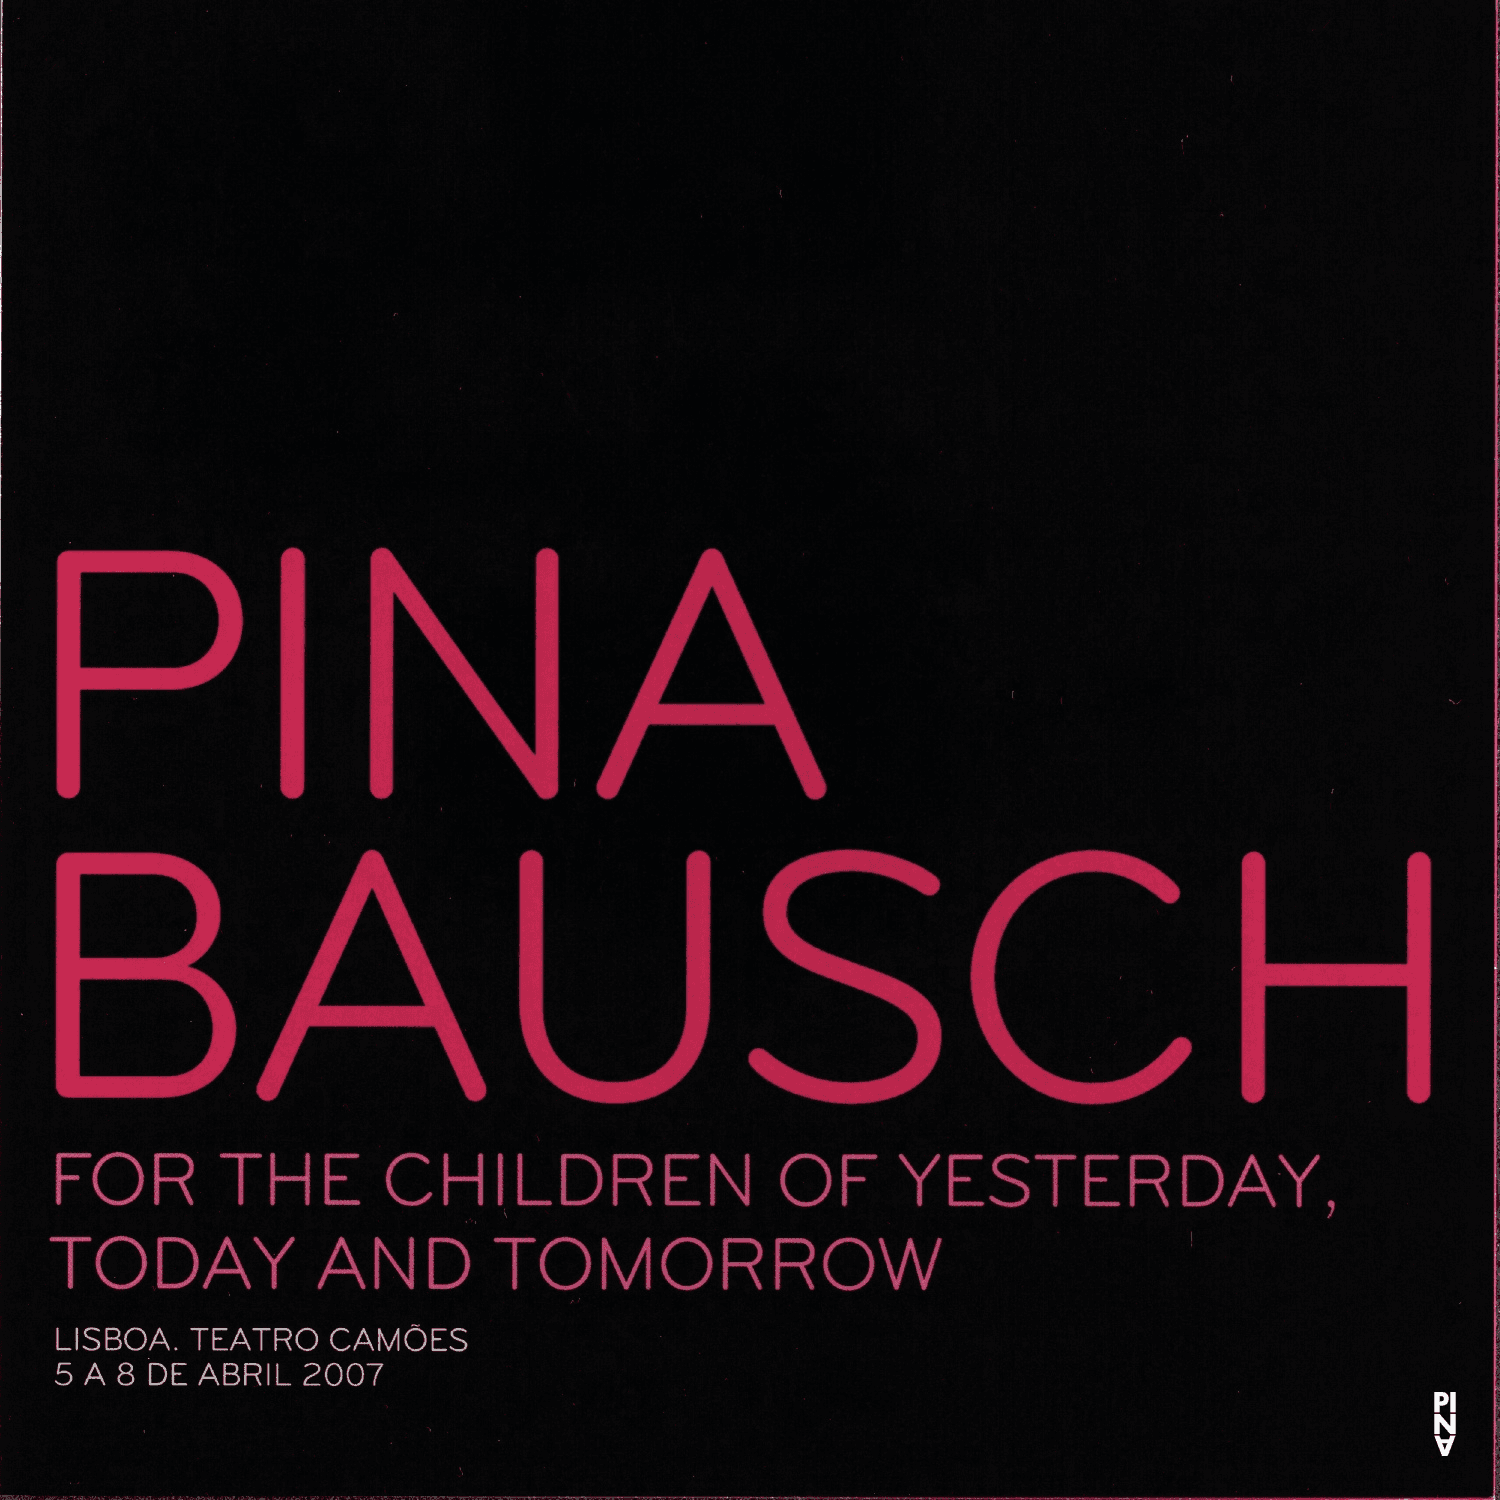 Booklet for “For the Children of Yesterday, Today and Tomorrow” by Pina Bausch with Tanztheater Wuppertal in in Lisbon, 04/05/2007 – 04/08/2007